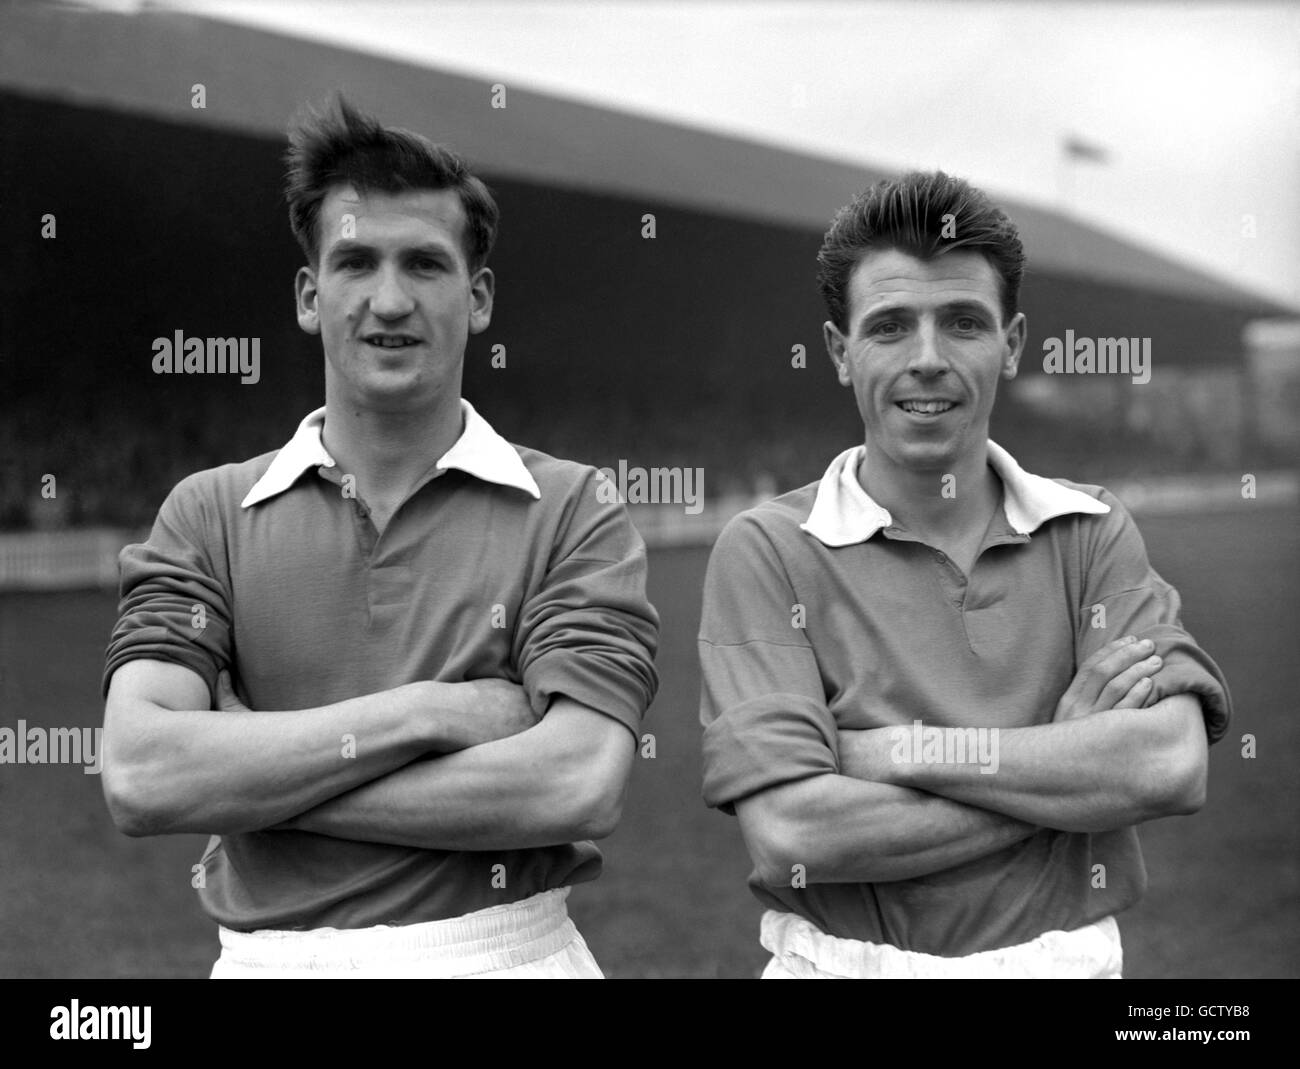 Soccer - League Division Three - Coventry City Football Club Photocall - Highfield Road. Barry Hawkings, left, and Gordon Nutt, Coventry City FC Stock Photo